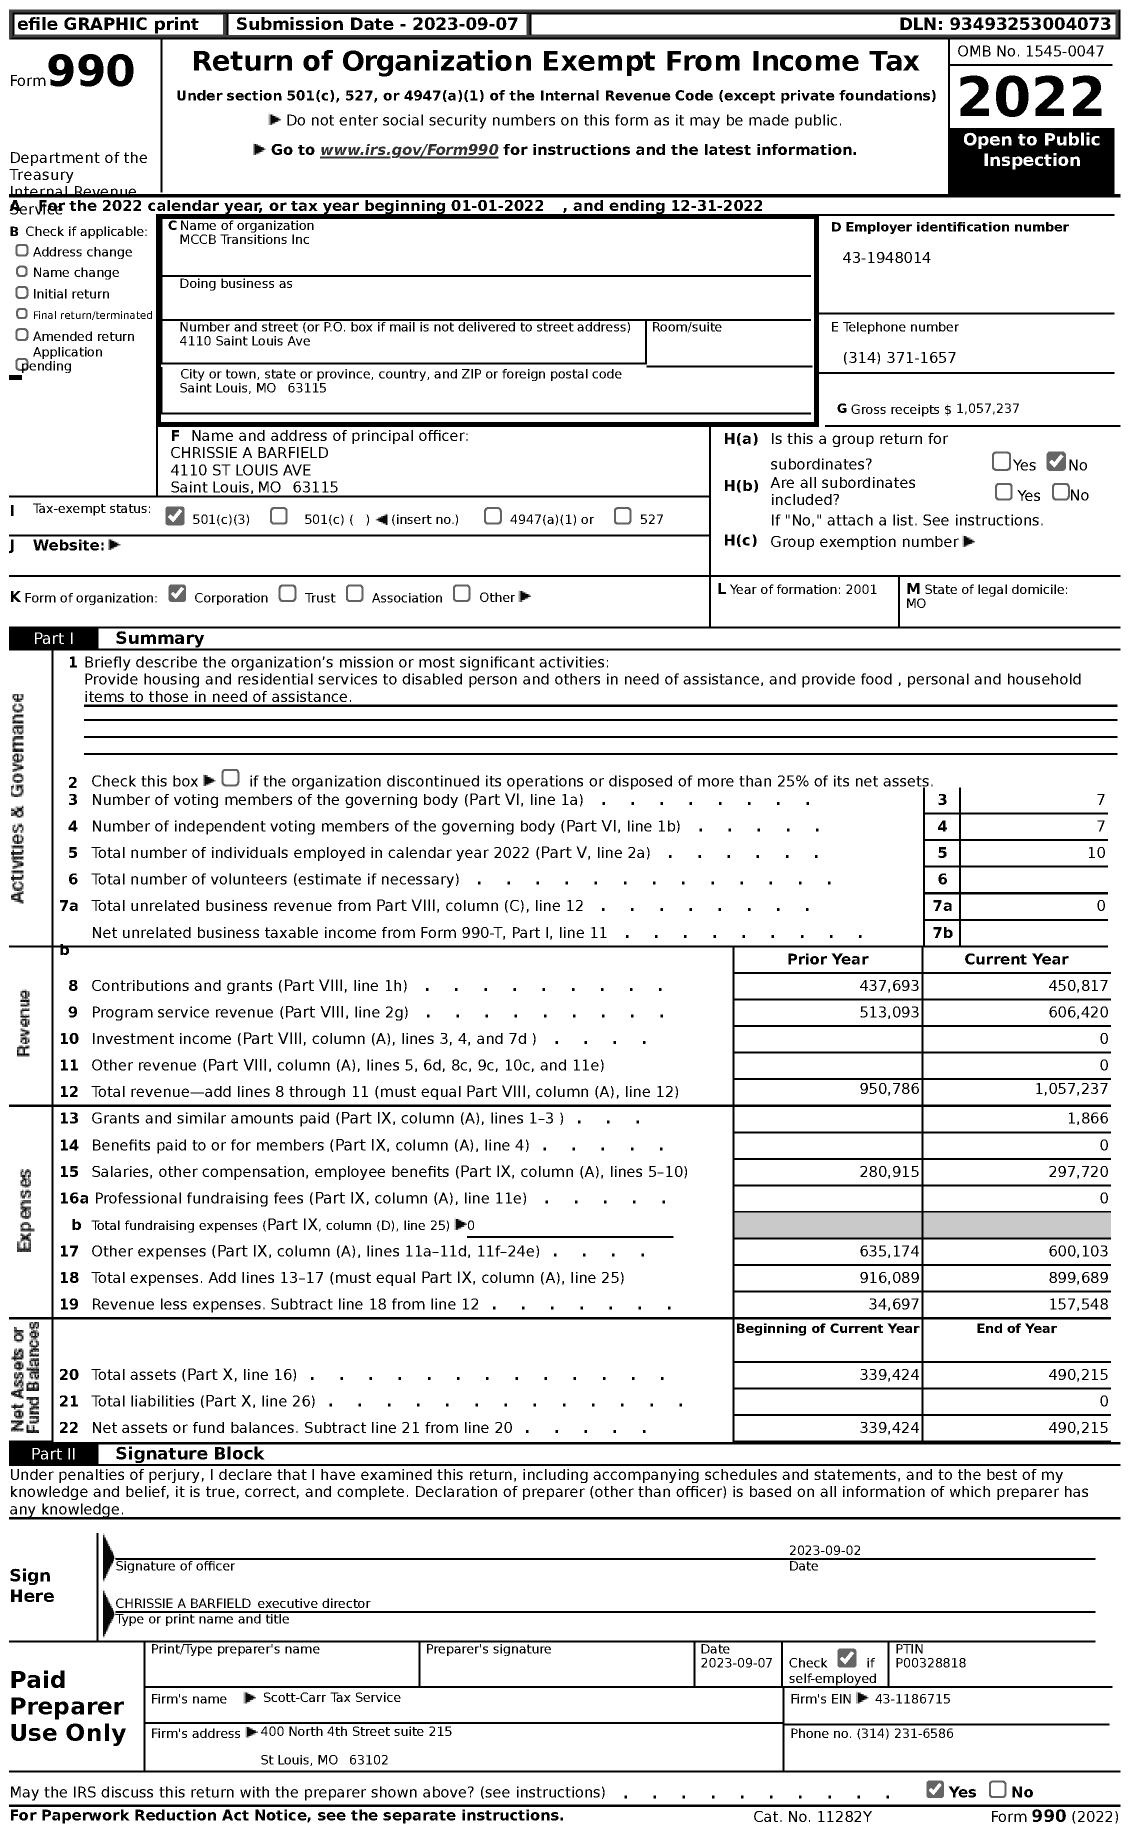 Image of first page of 2022 Form 990 for MCCB Transitions